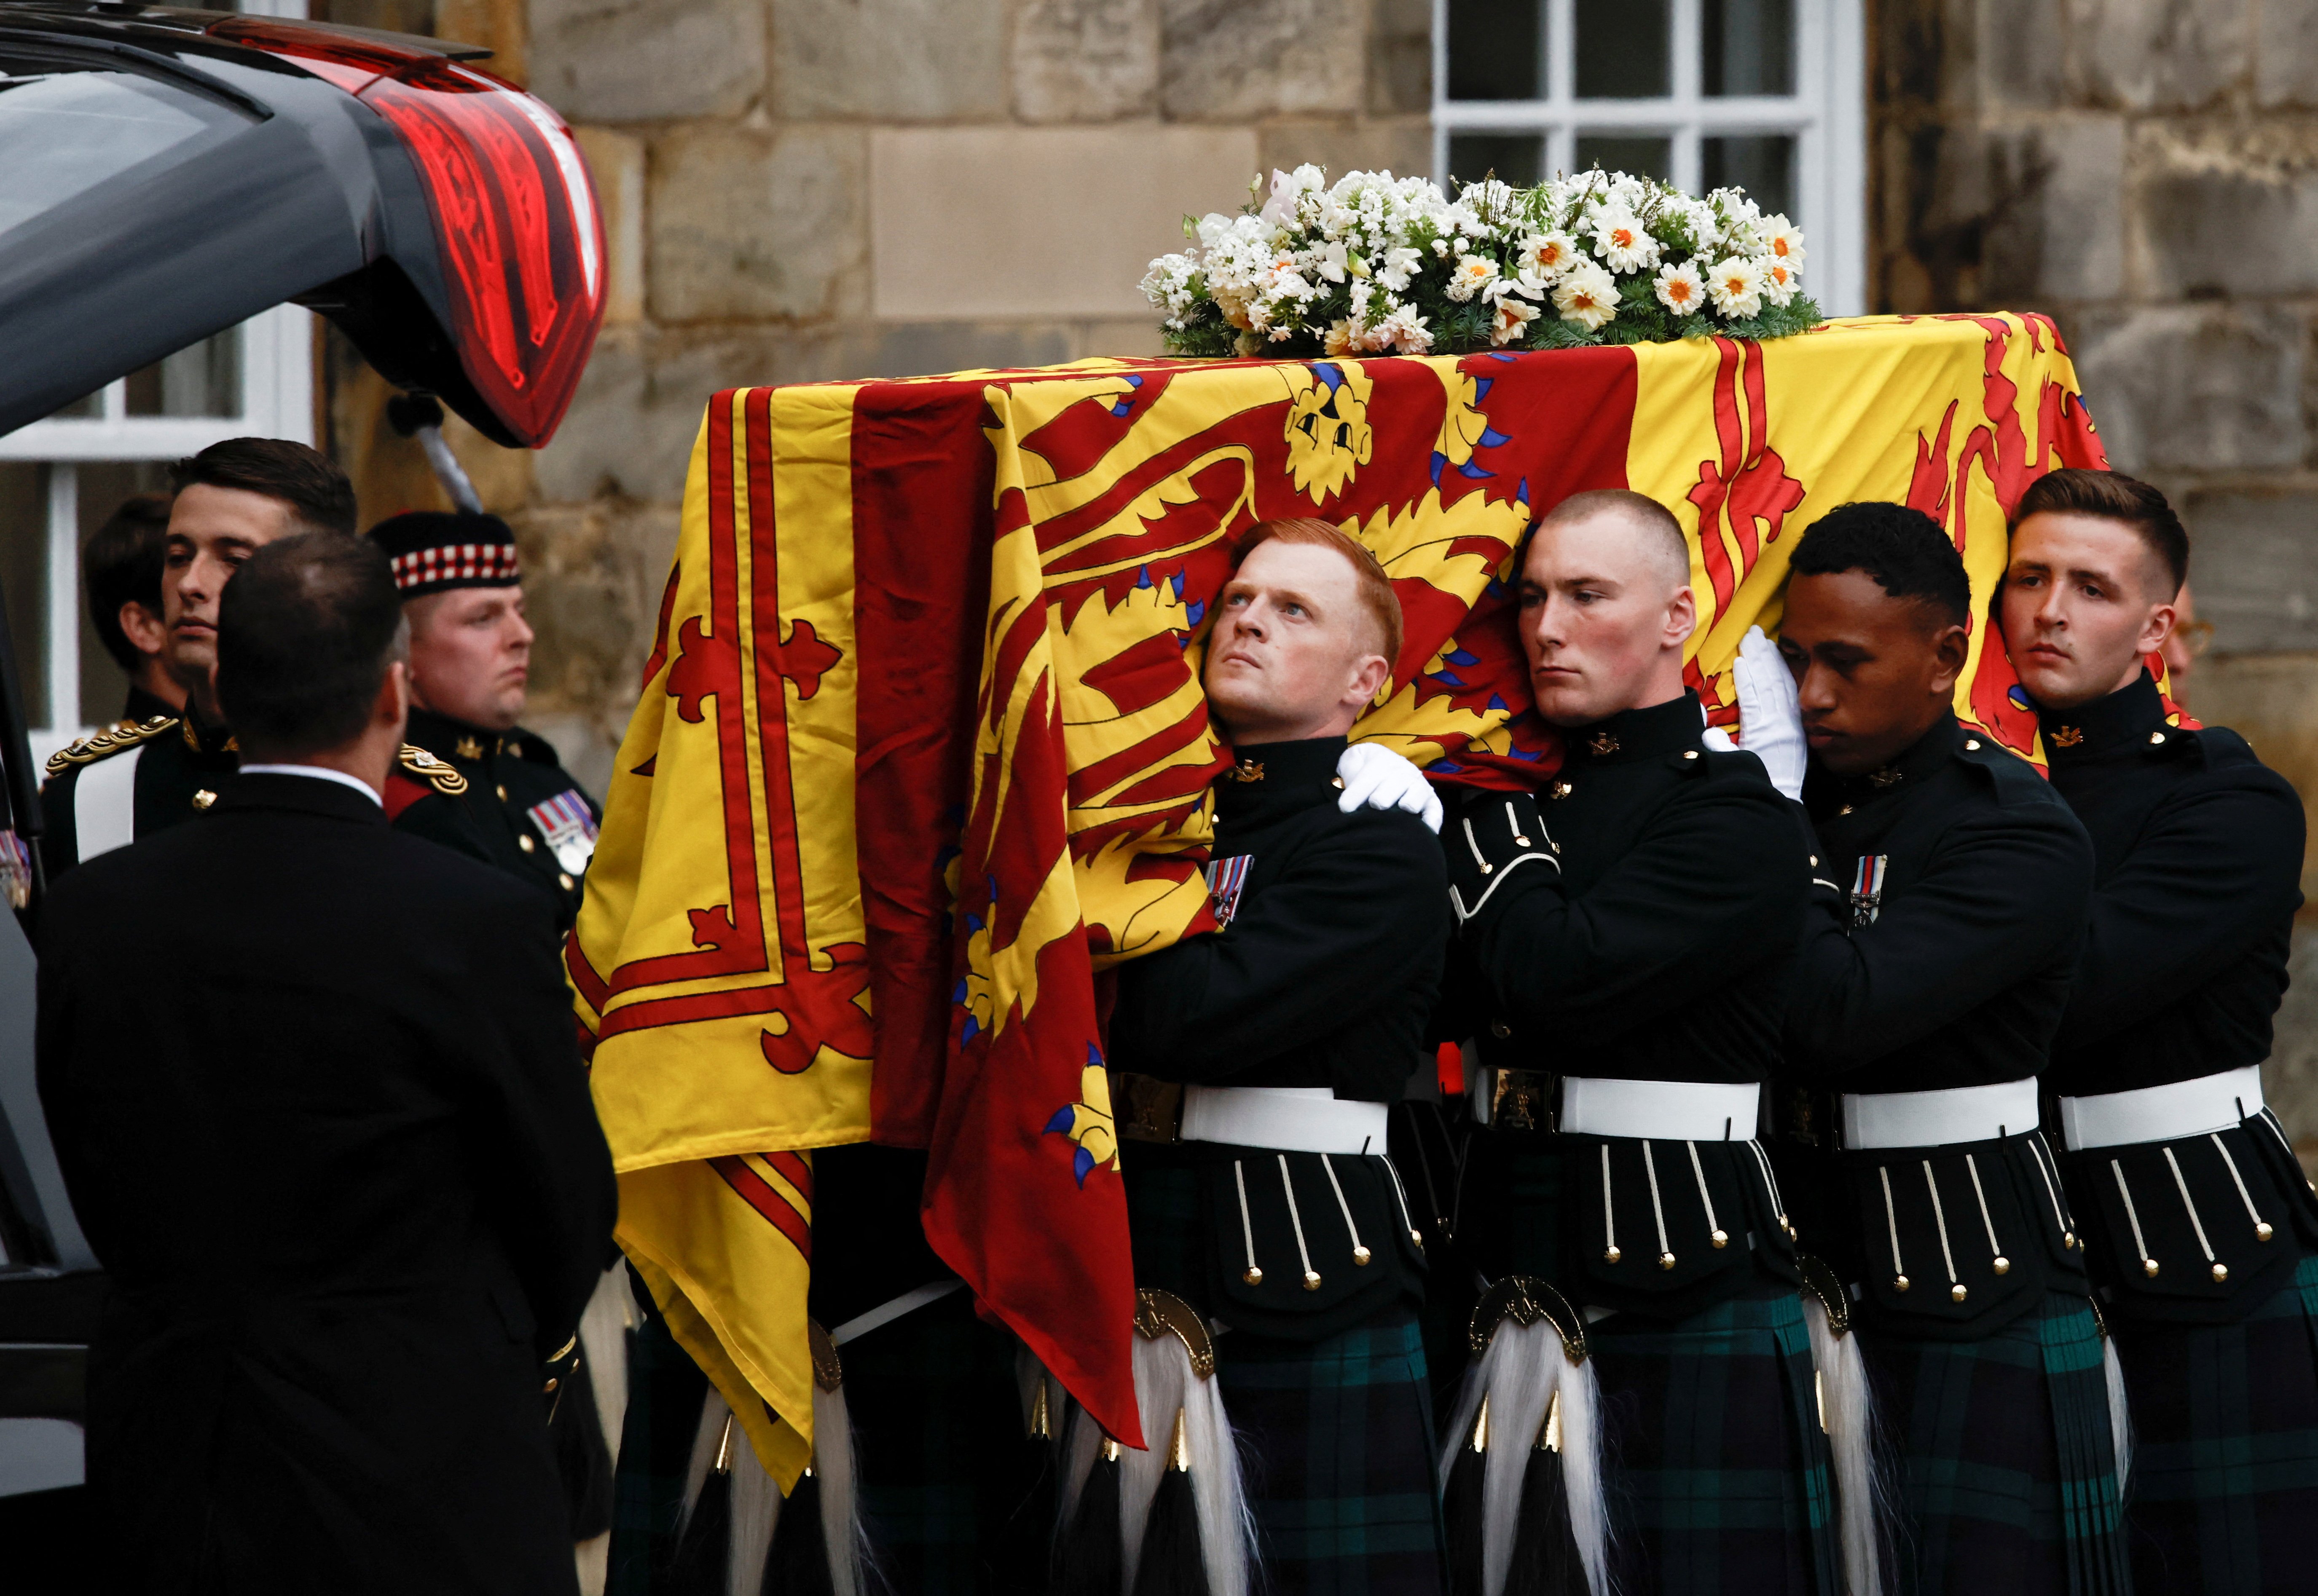 Pallbearers carry the coffin of Britain's Queen Elizabeth II as the hearse arrives at the Palace of Holyroodhouse on September 11, 2022, in Edinburgh, United Kingdom. | Source: Getty Images